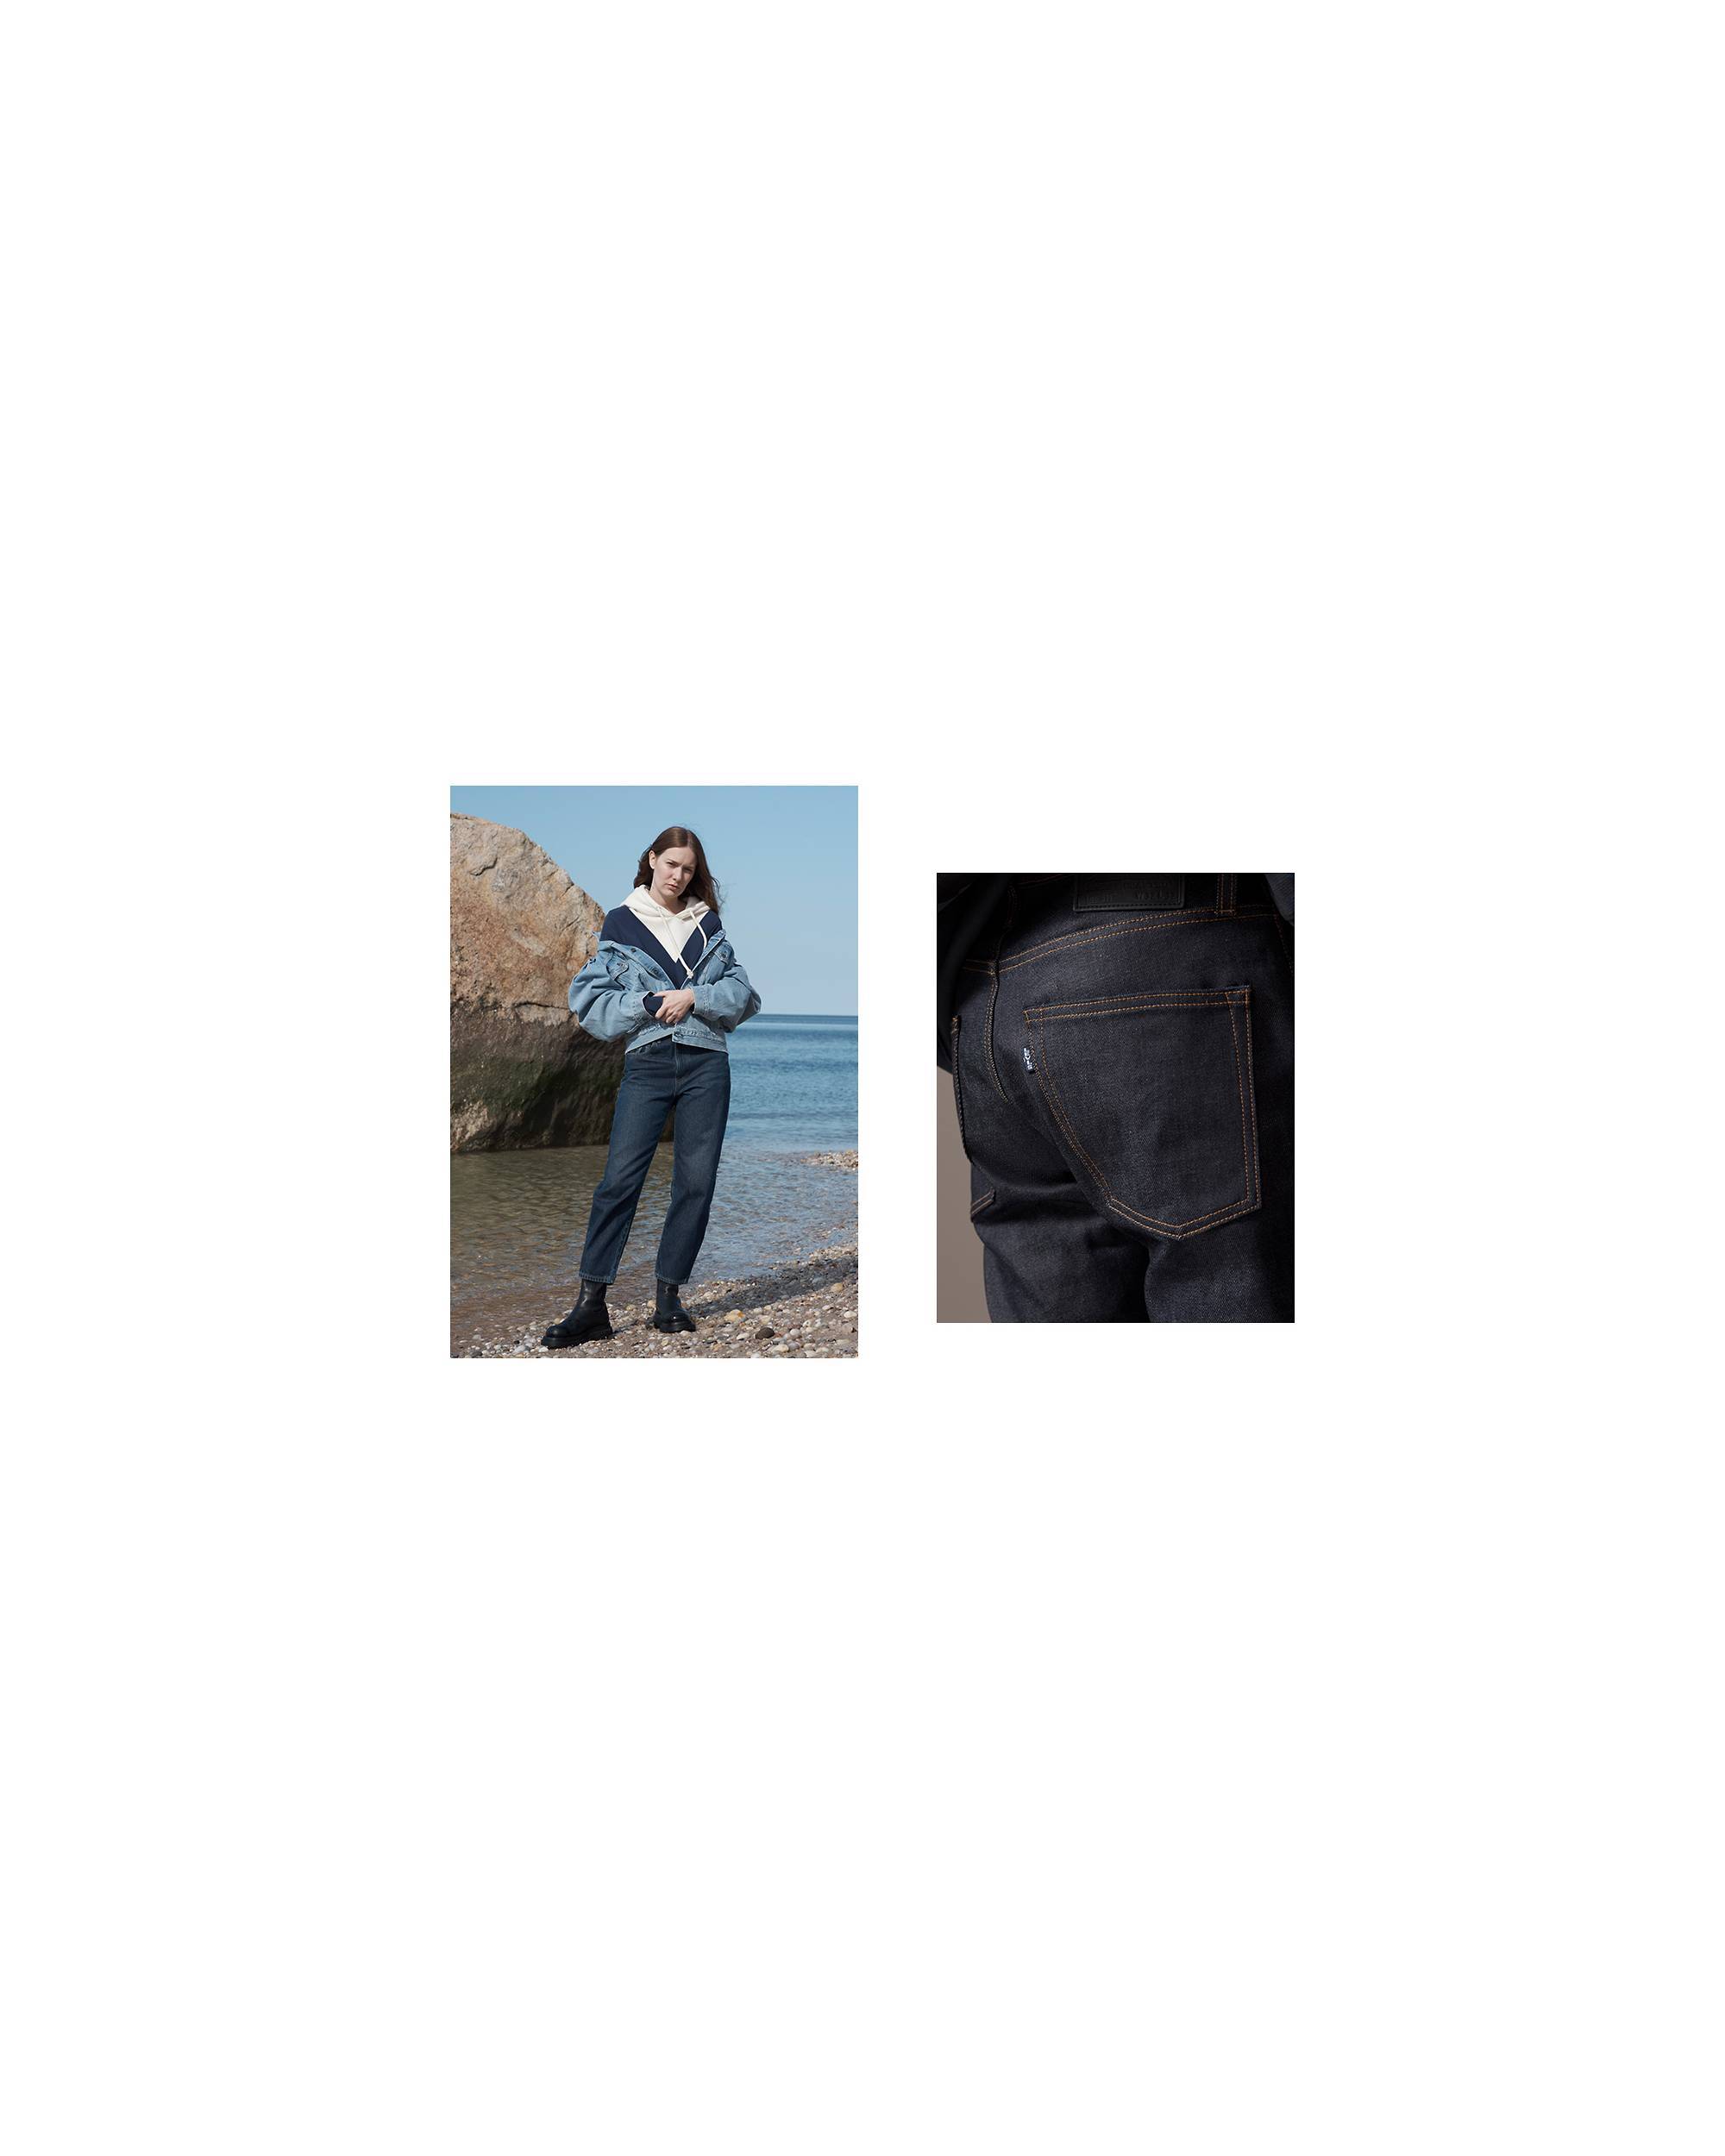 A collage of a woman standing on the shore of a beach wearing dark-washed cropped jeans and a medium-washed jean jacket over a blue and white hooded sweatshirt, and a back pocket of a men's dark-washed jean.